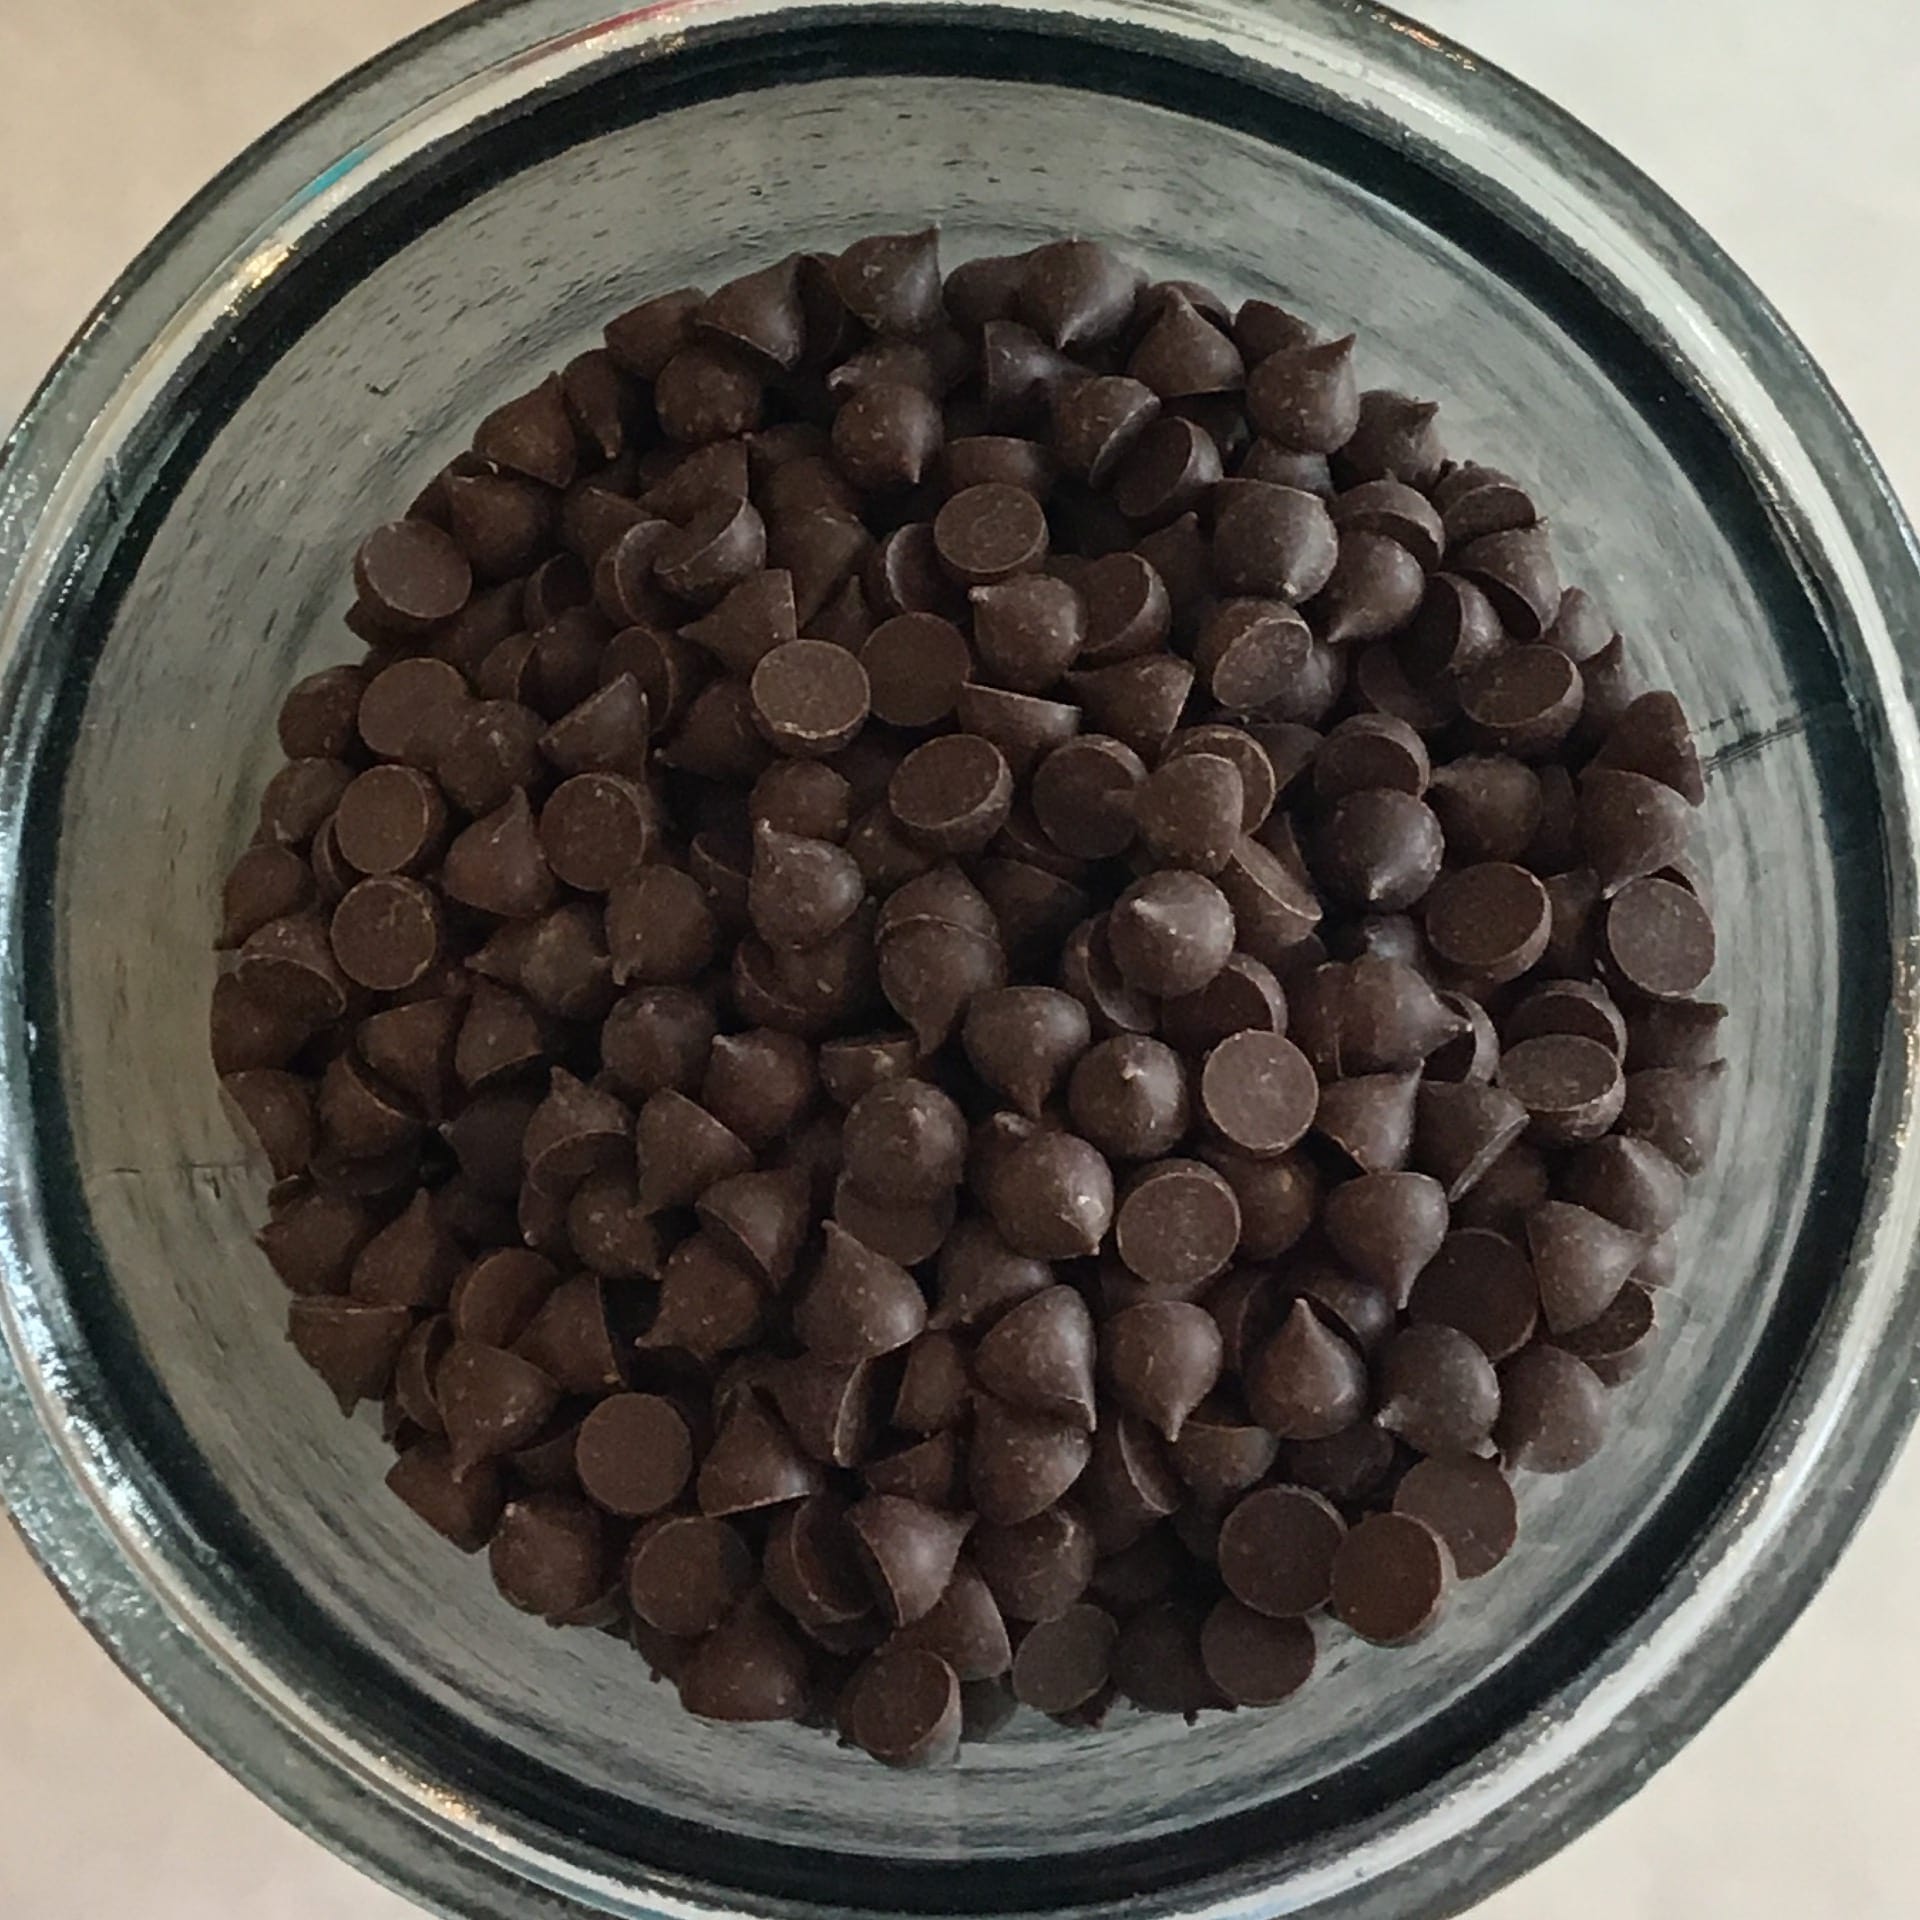 Vegan dark chocolate chips at 55% cocoa powder content, bring in your own container from home to refill